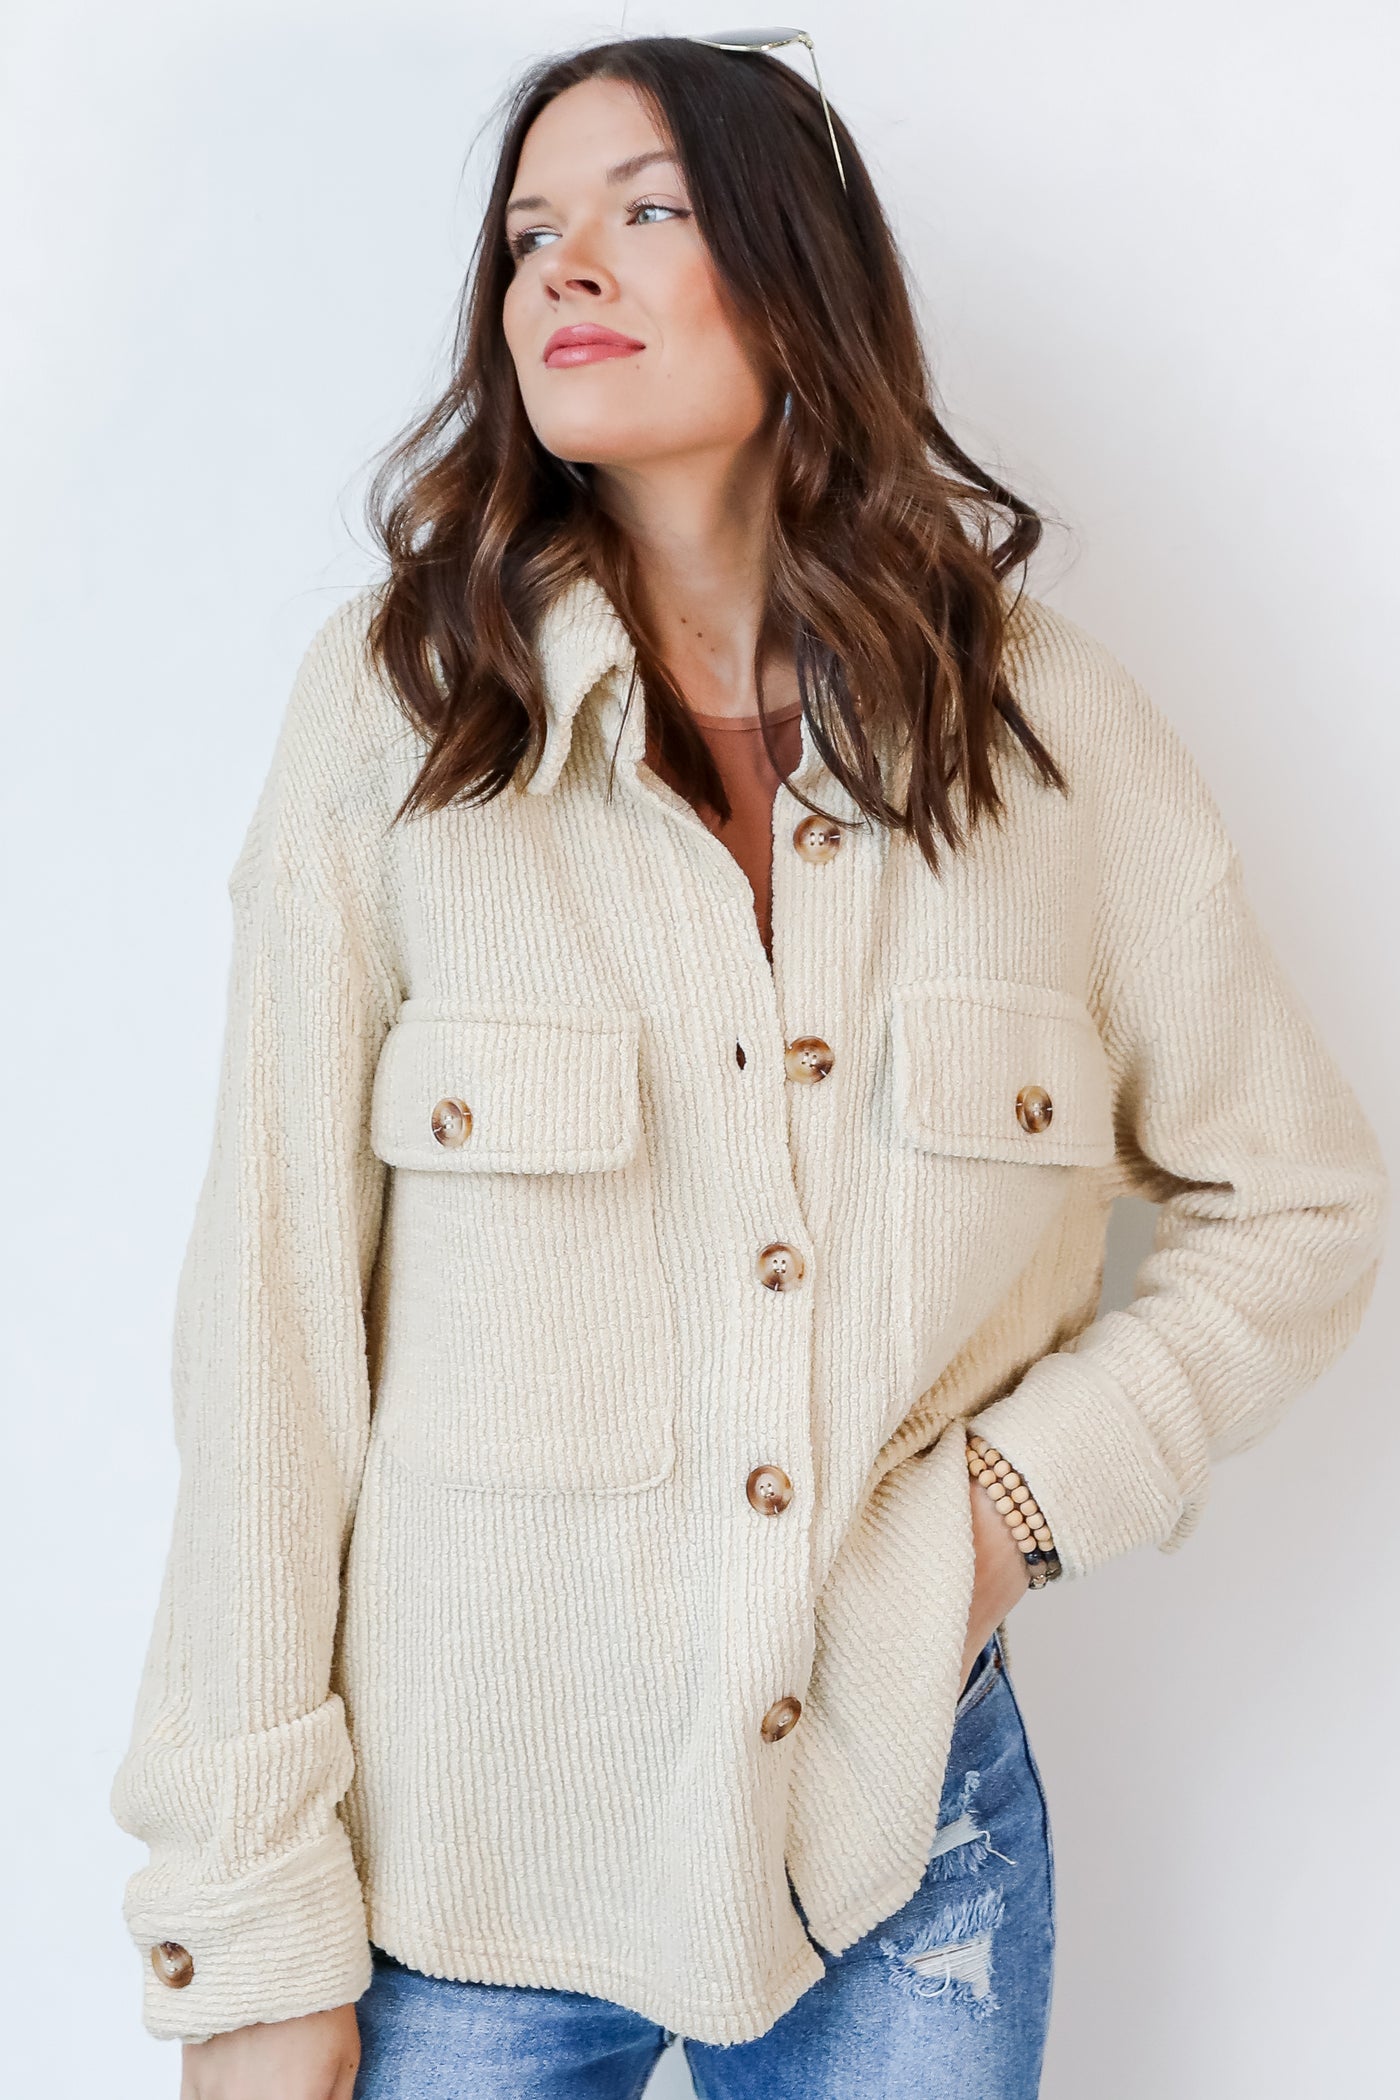 Corded Shacket in ivory front view